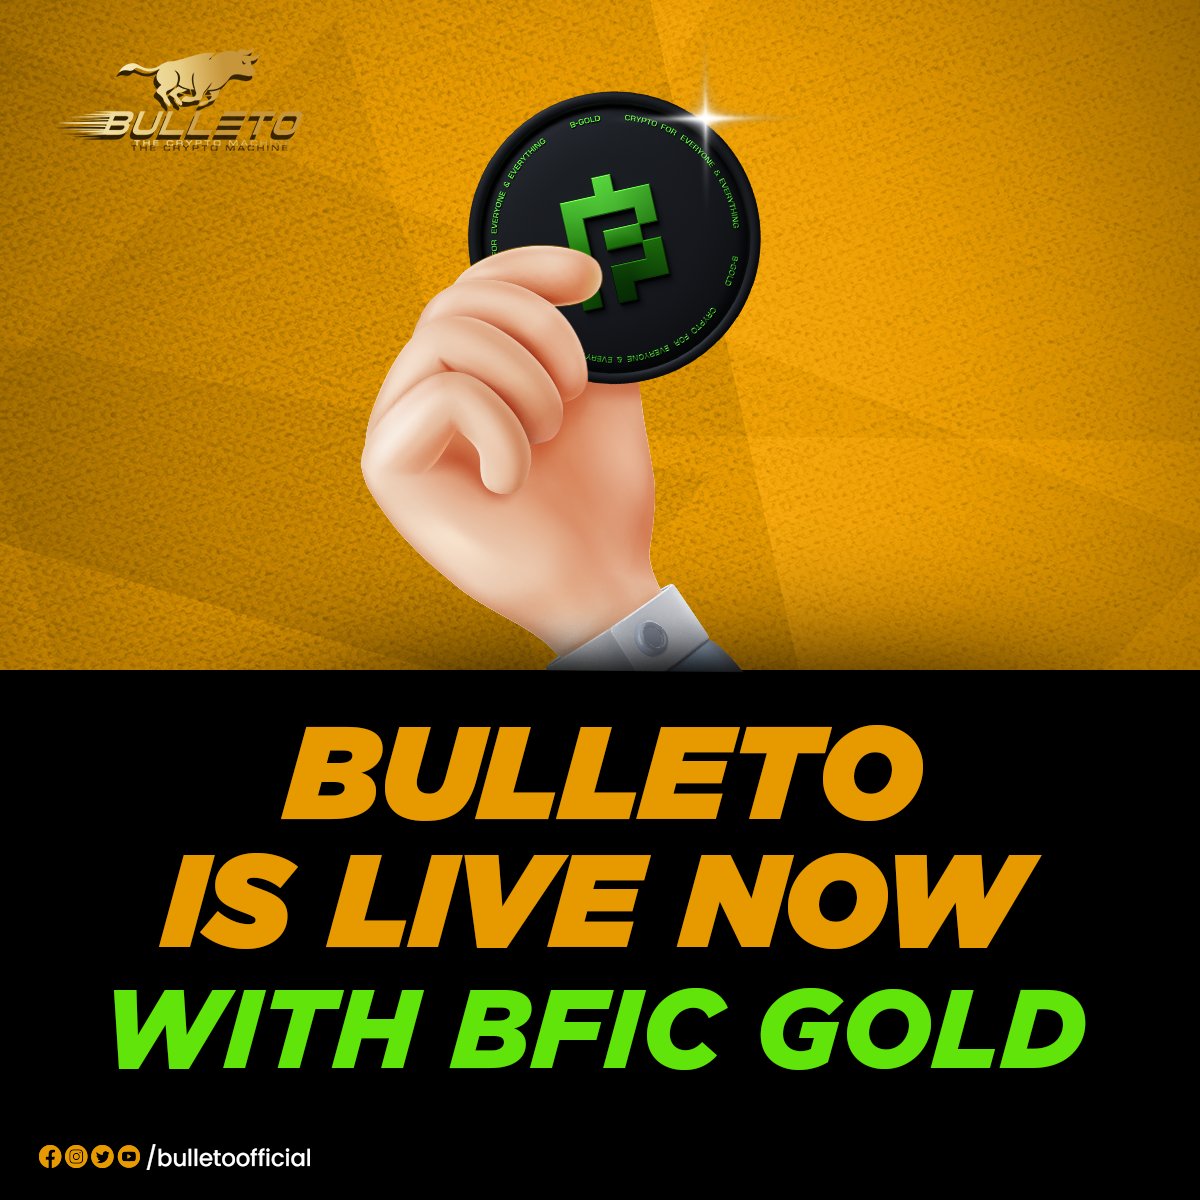 Exciting news! 🔥
Bulleto is officially live with BFIC Gold,
offering you a golden opportunity 

#Bulleto #BulletoCommunity #BFICGold #BFICGoldincome #BFICCommunity #BFICGoldCommunity #TheCryptoMachine #NowLIVE #Changeyourlife #earnmoneyonline #EarnwithBulleto #free #Live